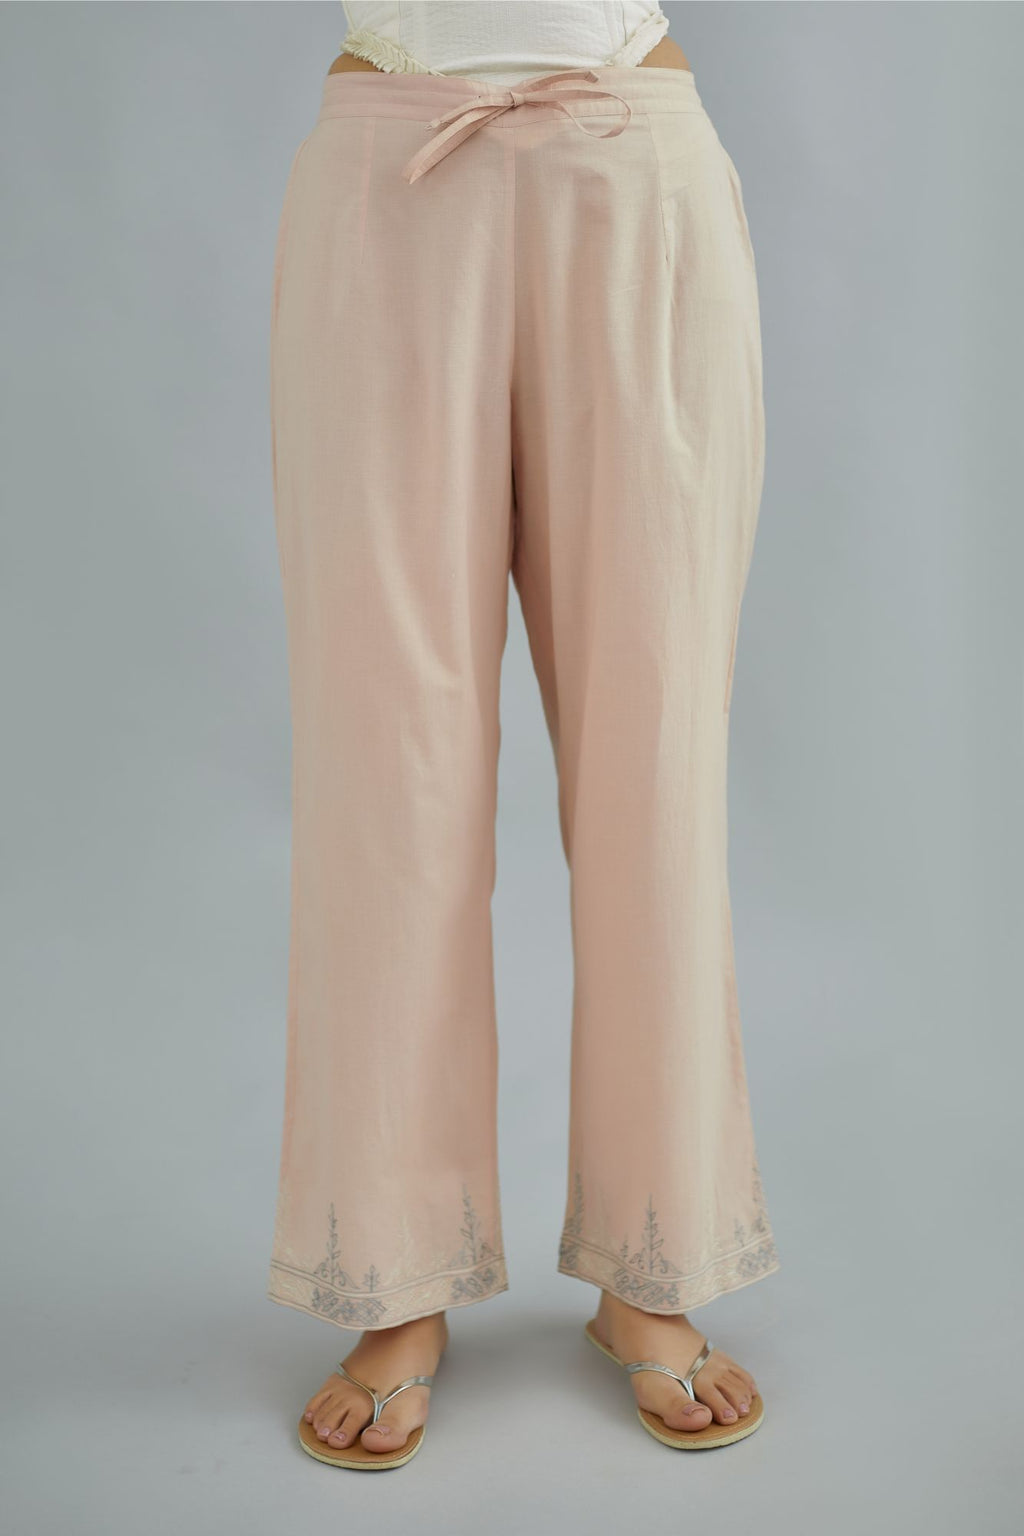 Pink straight cotton pants with thread embroidery at bottom hem